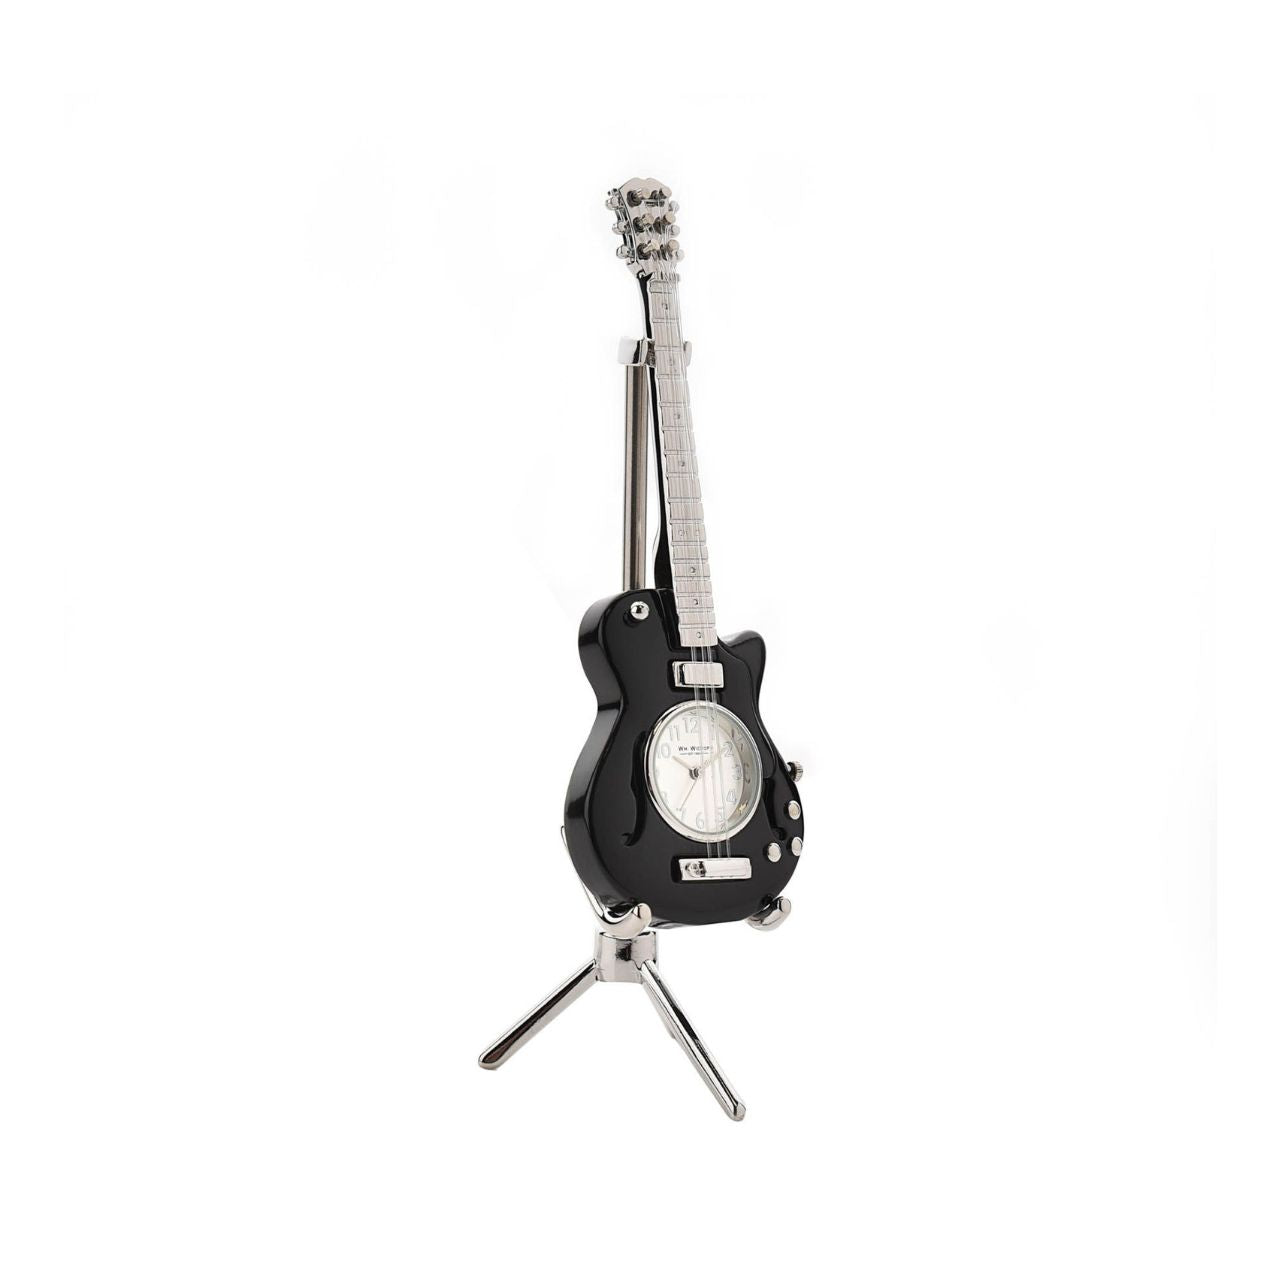 This dazzling guitar clock has a lasting style that would complement any bedside table or living room mantelpiece.